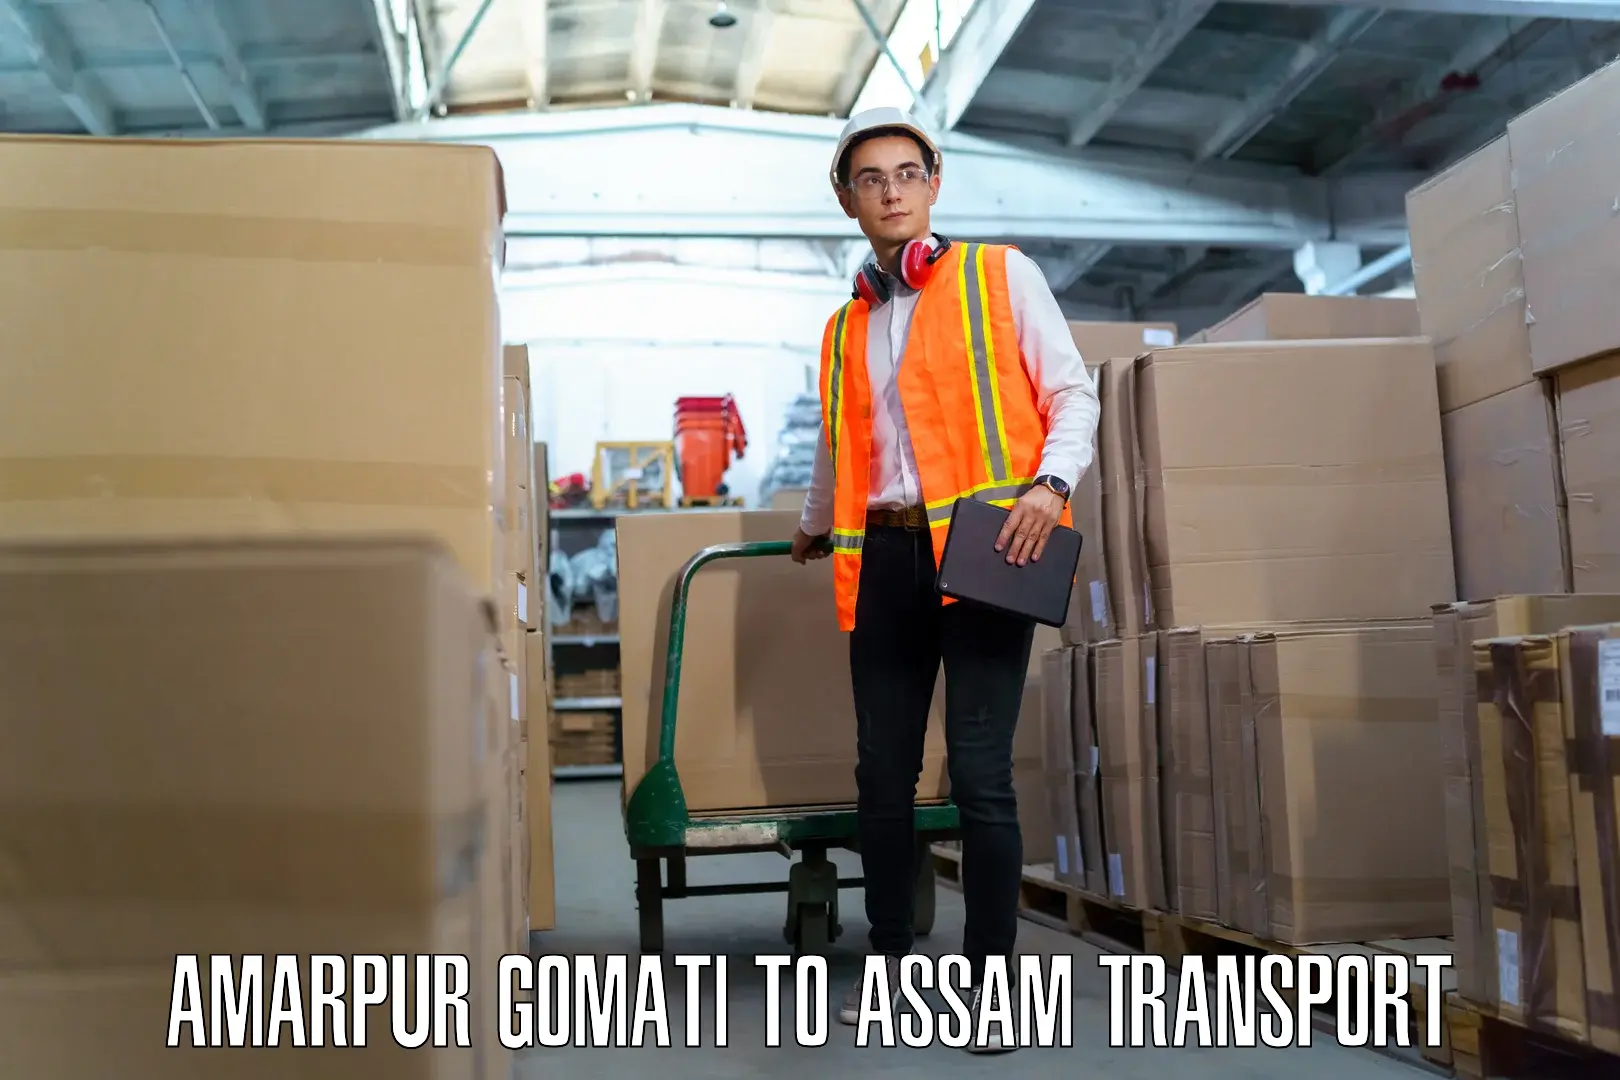 Transport bike from one state to another Amarpur Gomati to Assam